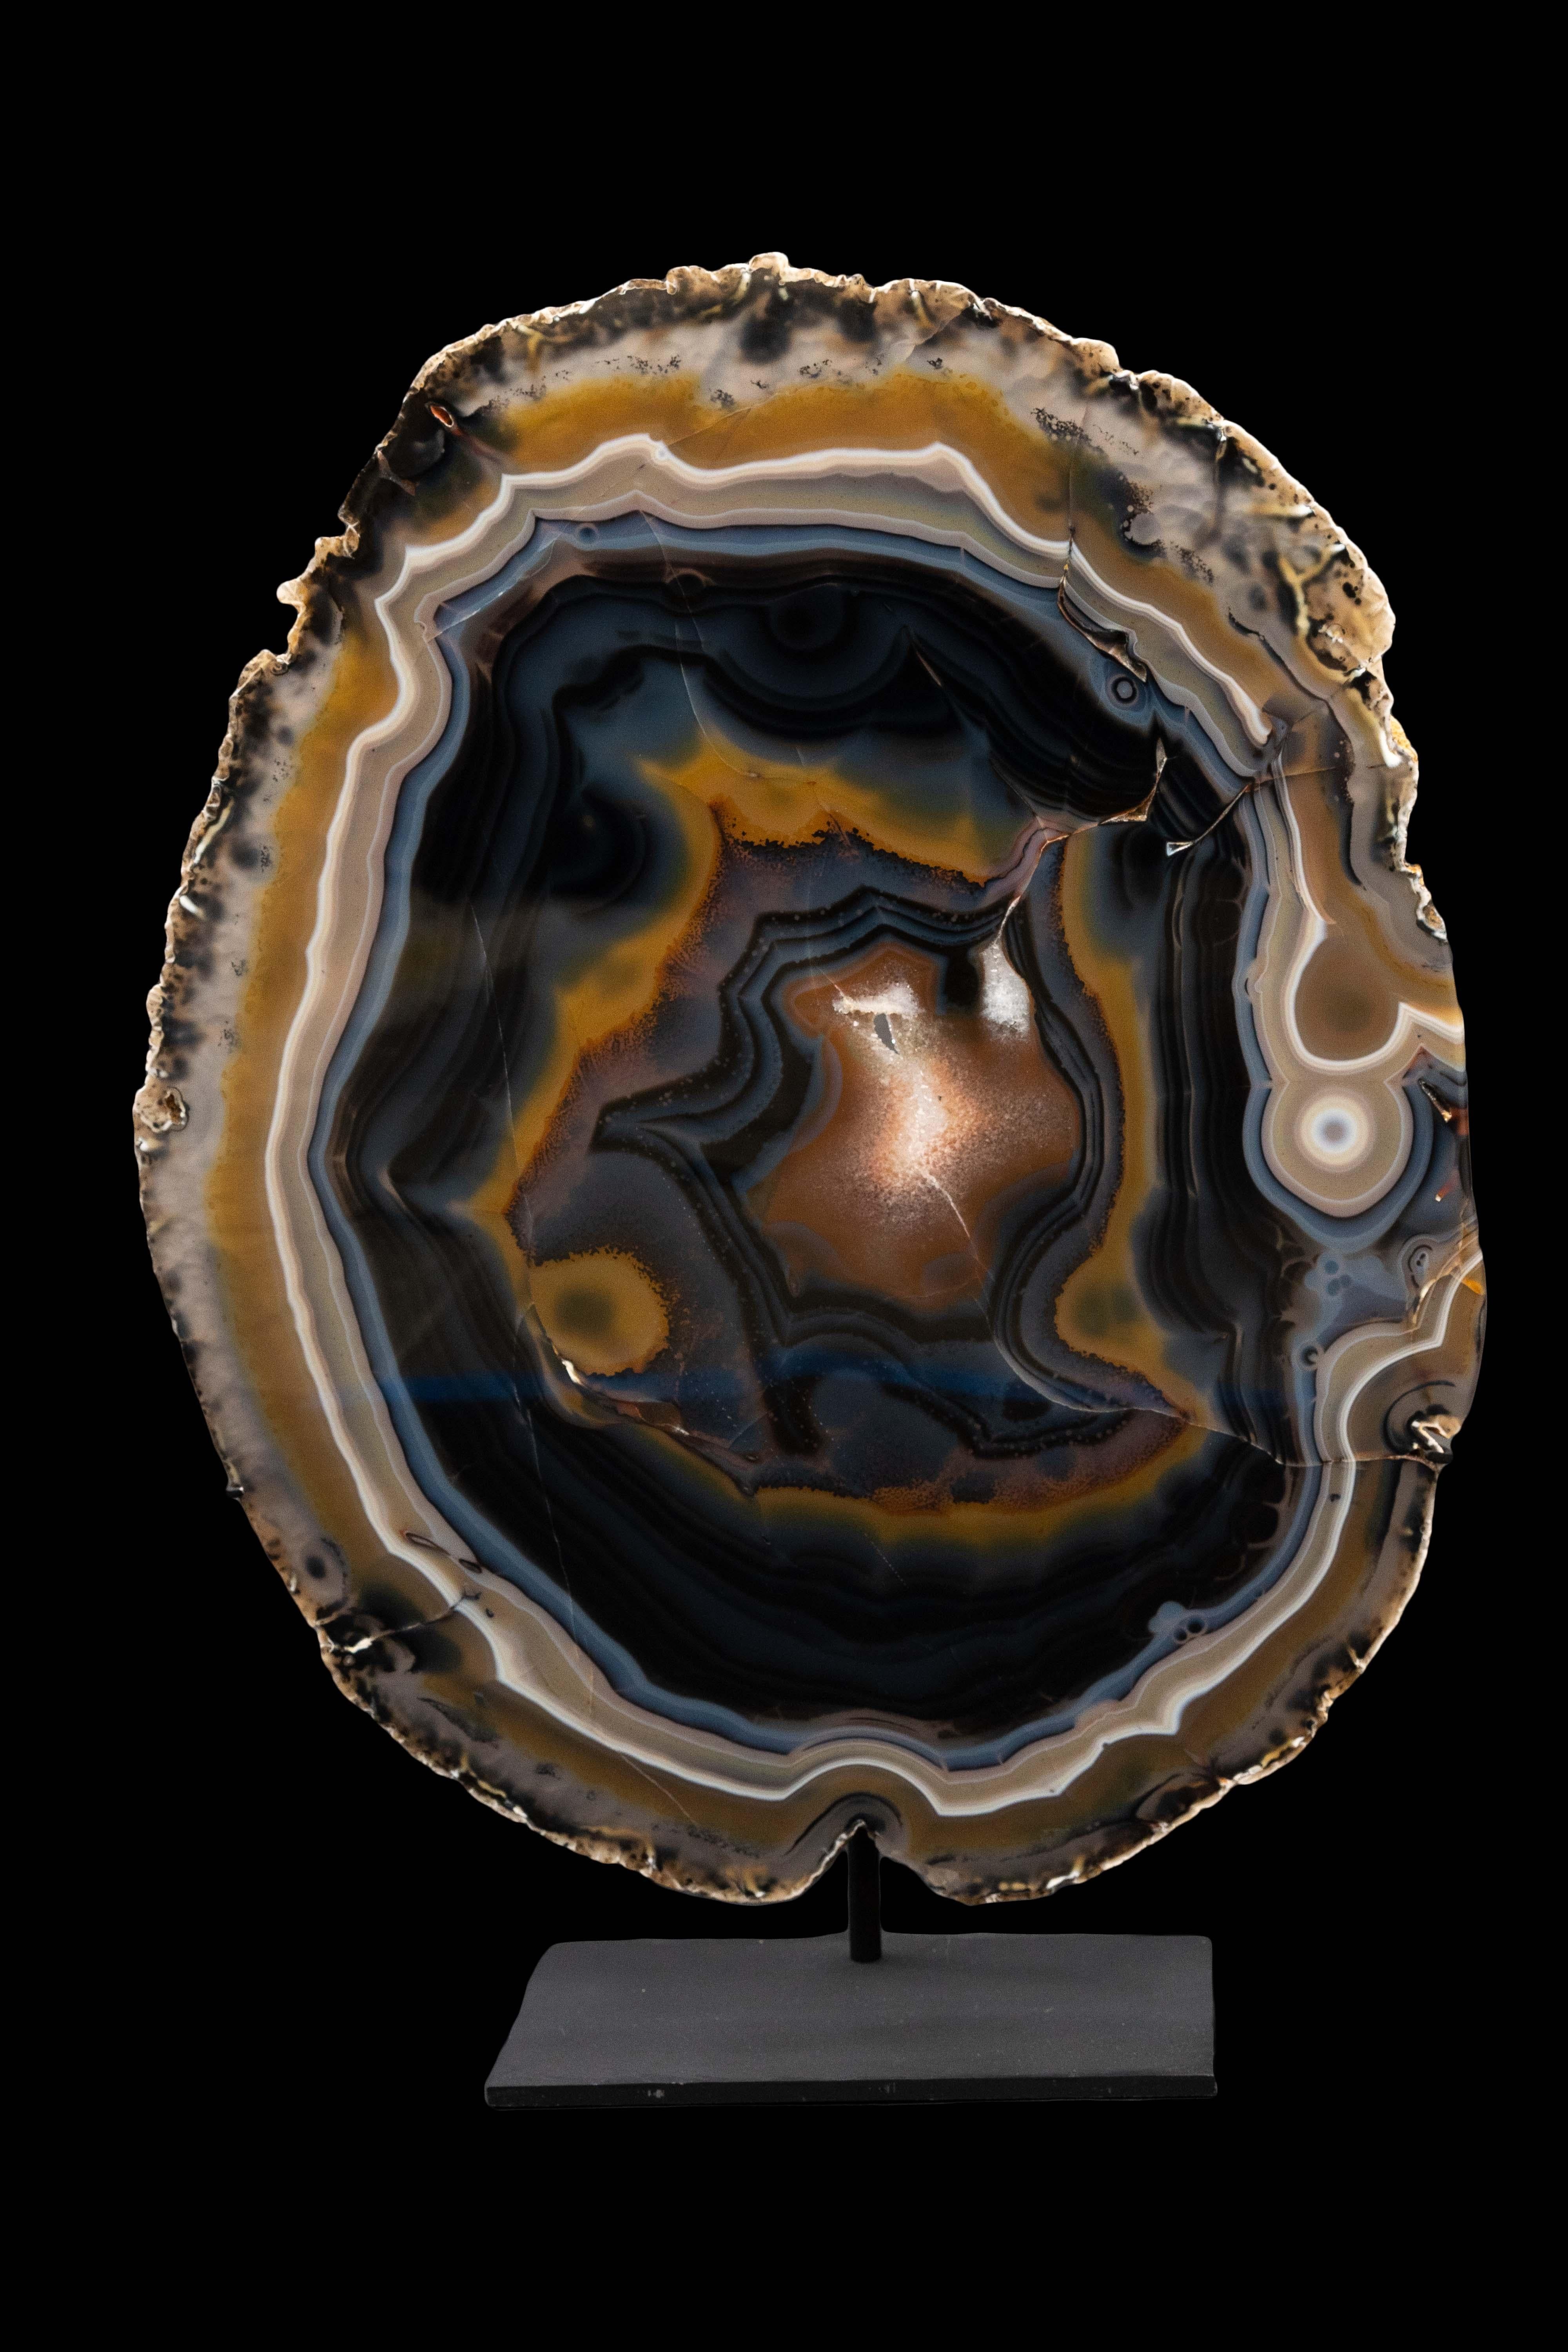 Very large agate slice on a custom mount featuring shades of banded taupe, brown, black, grey and crystalline white. Agate is thought to bring about an emotional, physical and intellectual balance:

Agate minerals have the tendency to form on or